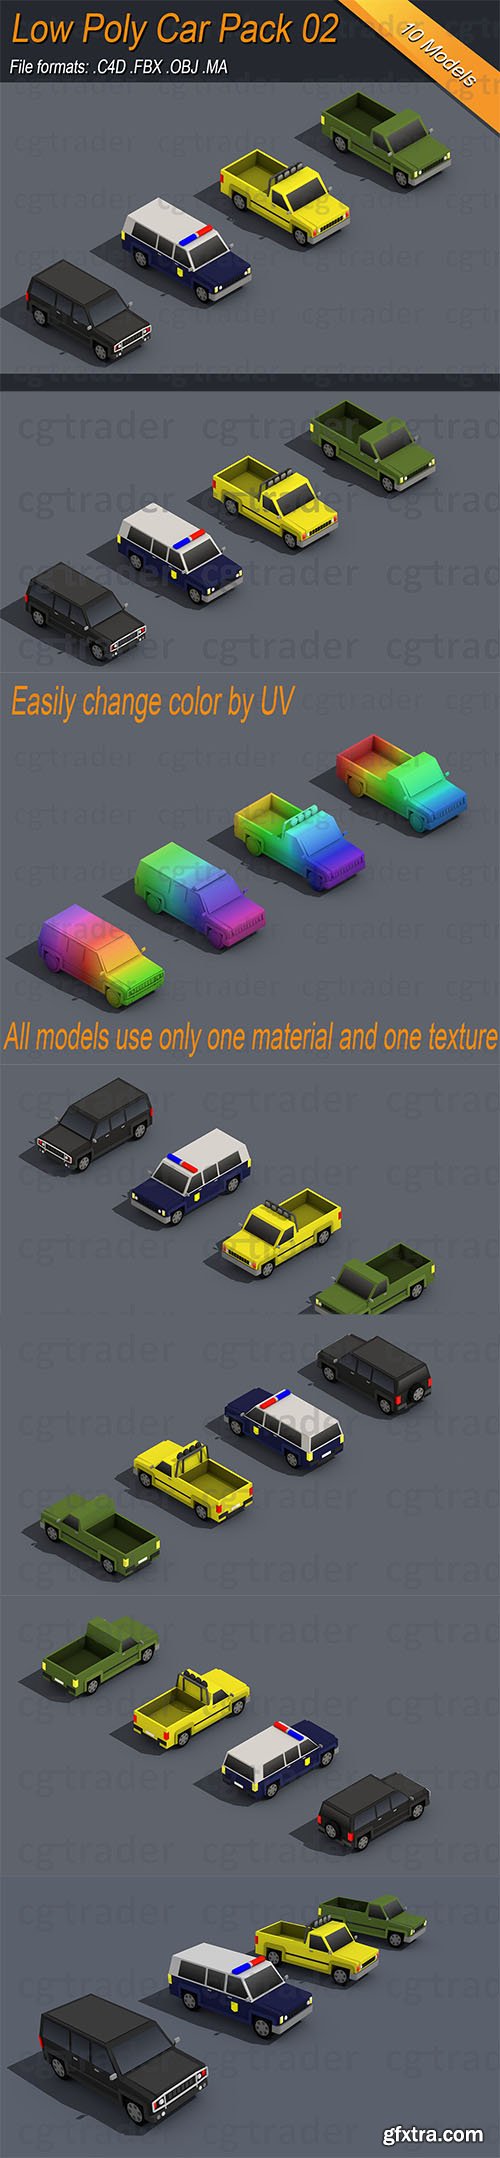 Cgtrader - Low Poly Truck Pack 02 Isometric Low-poly 3D model